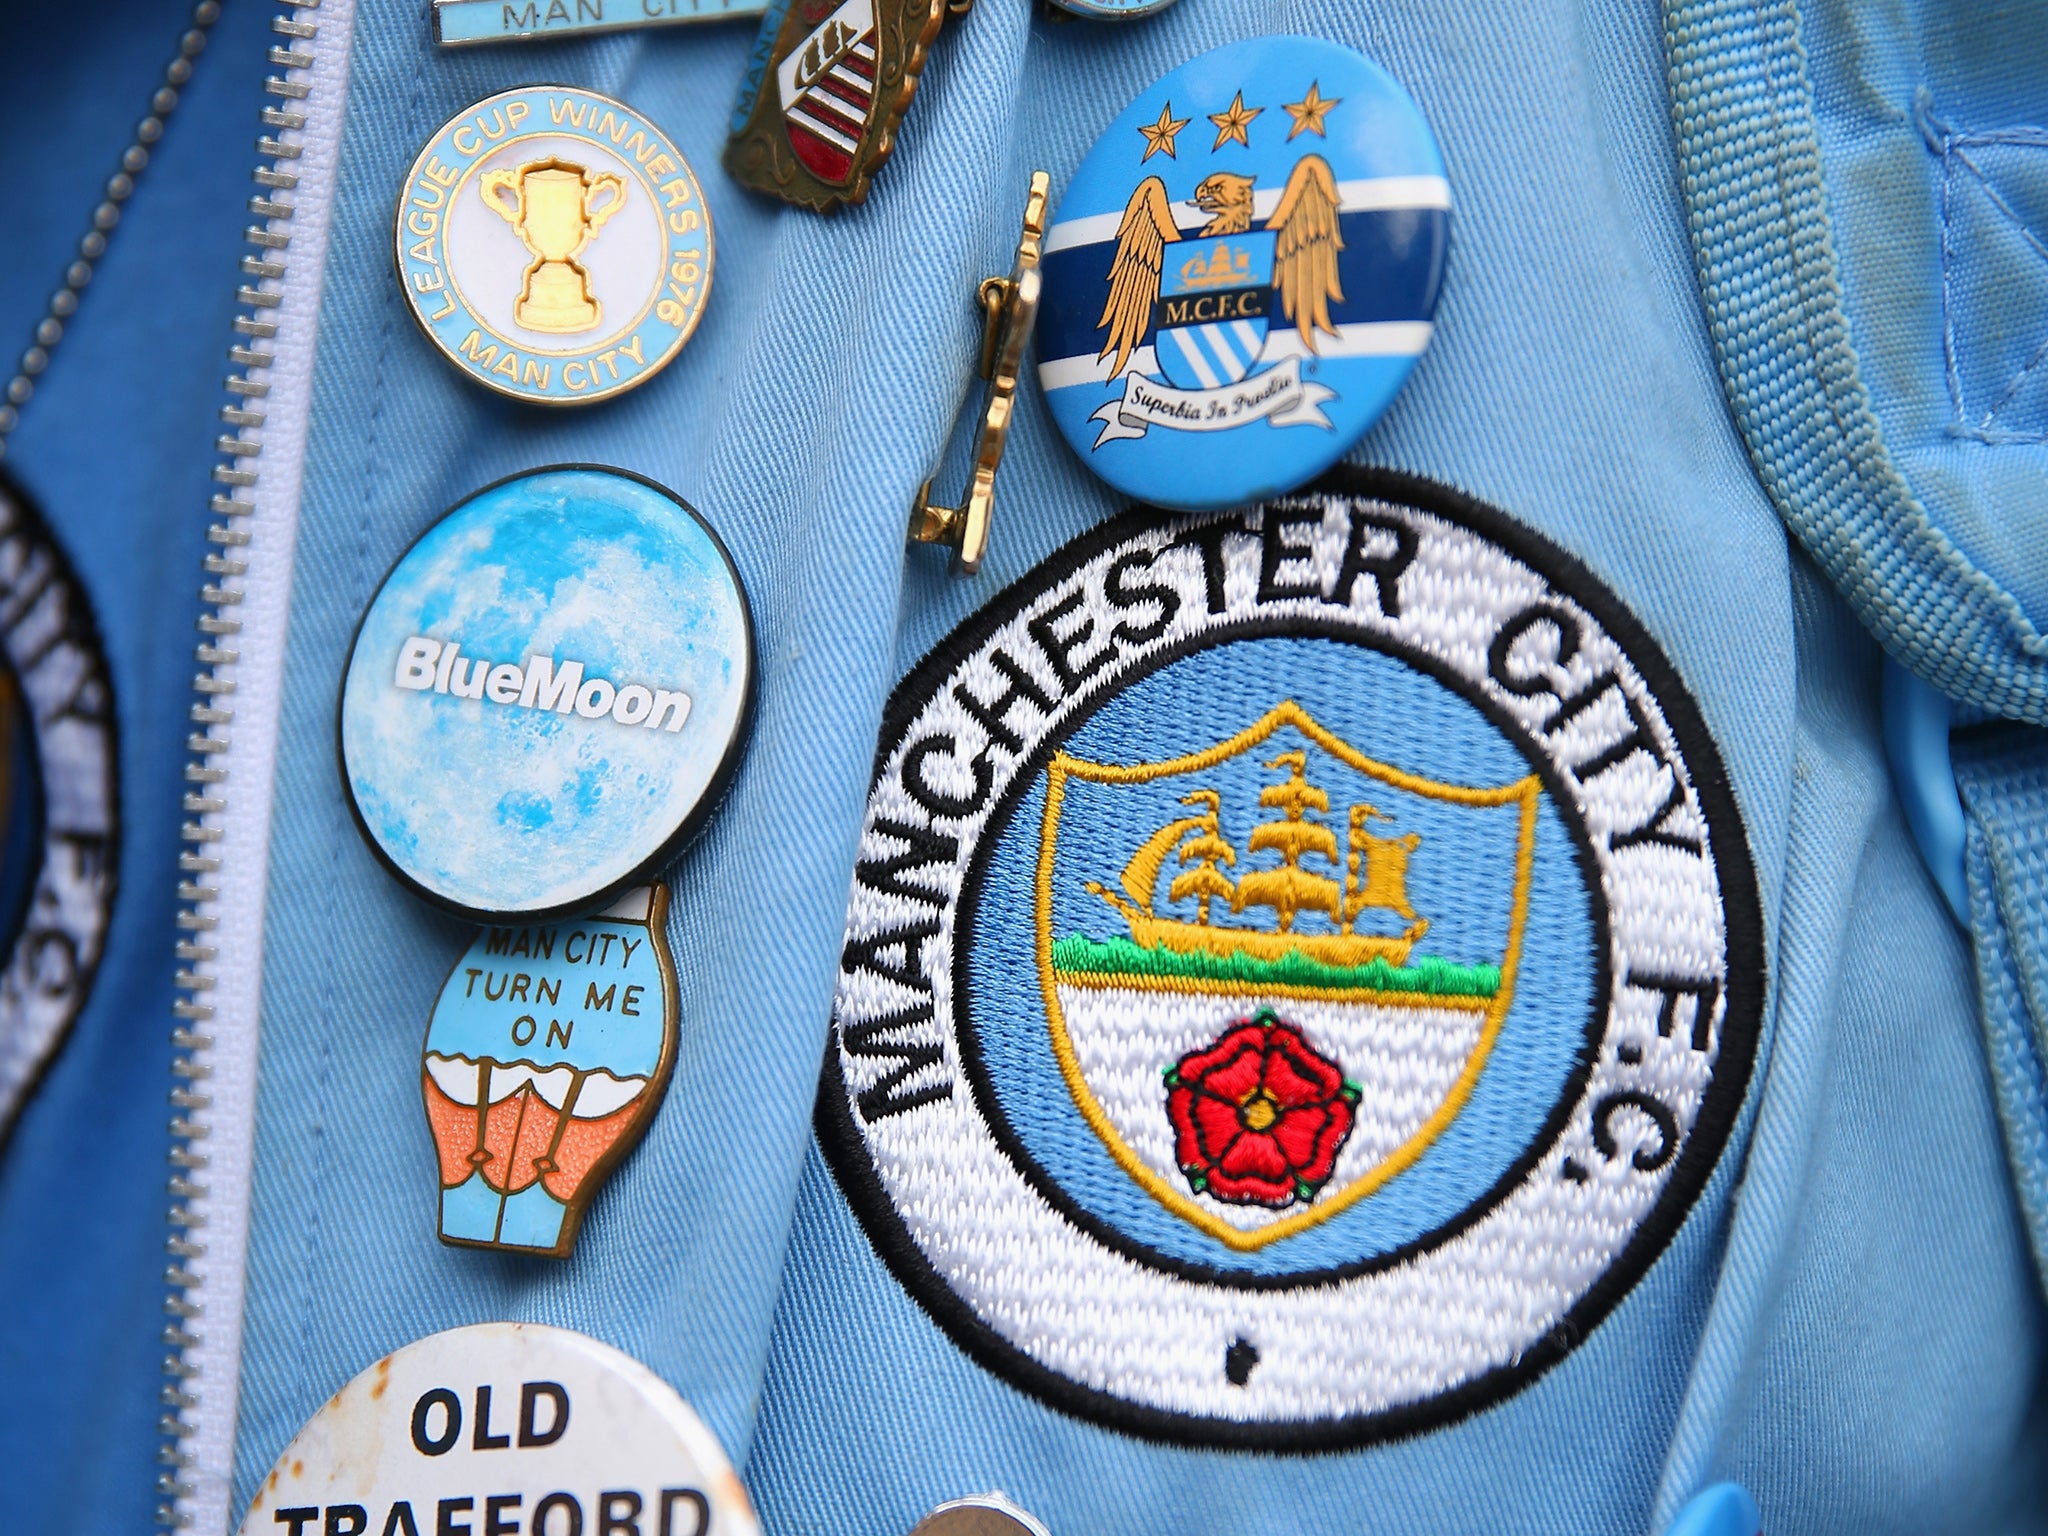 Manchester City's former badge (main), used between 1972 and 1997, with the club's current badge featuring above